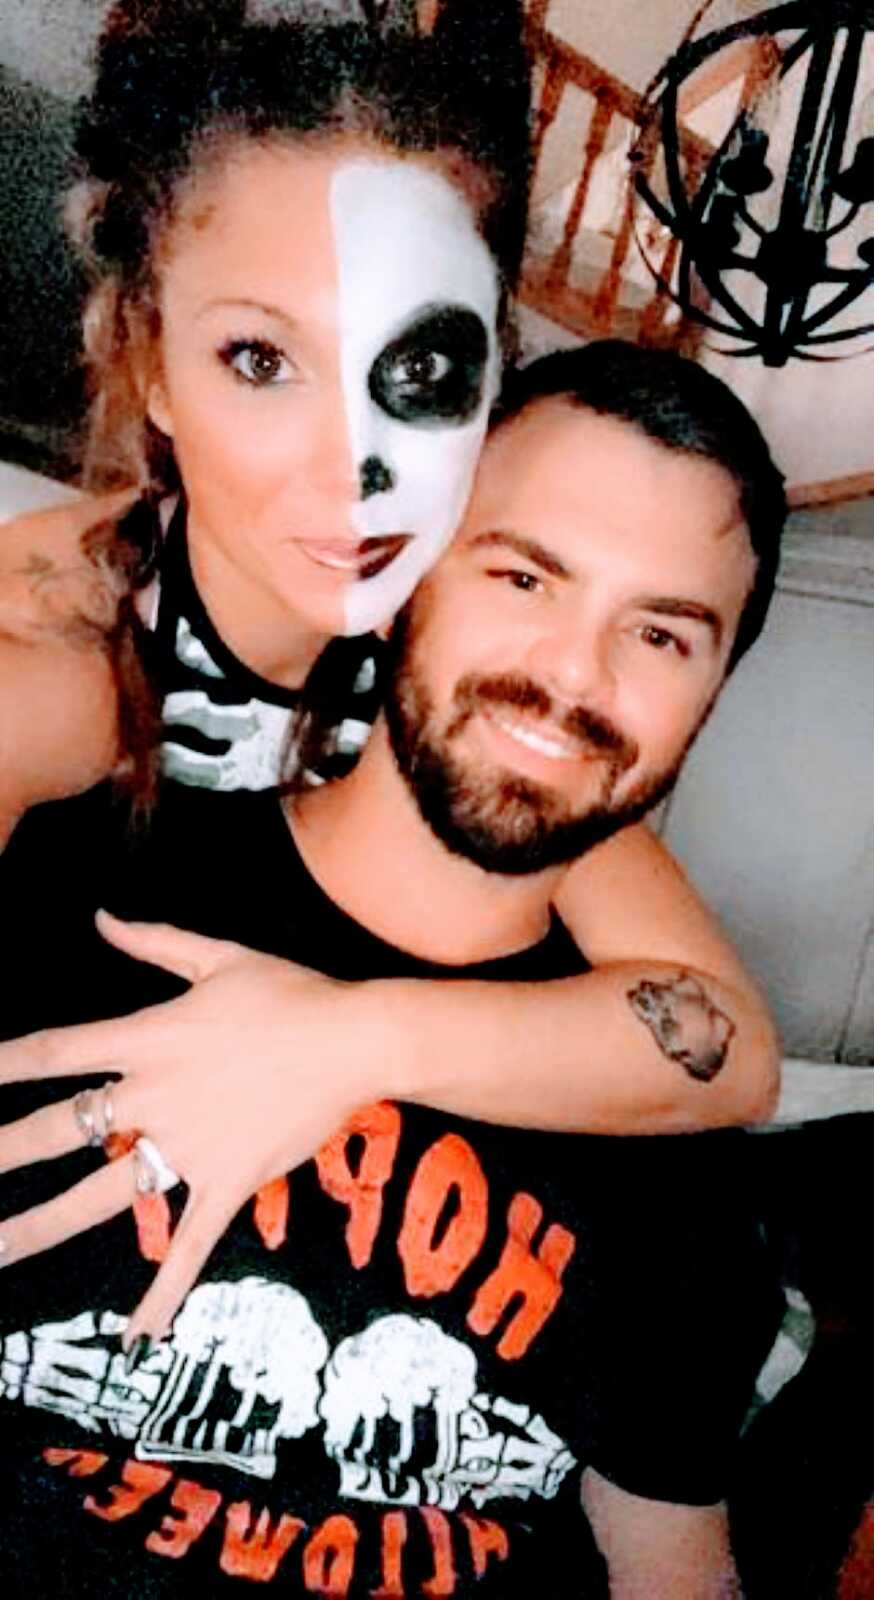 Married couple take an intimate selfie together on Halloween while in Halloween costumes